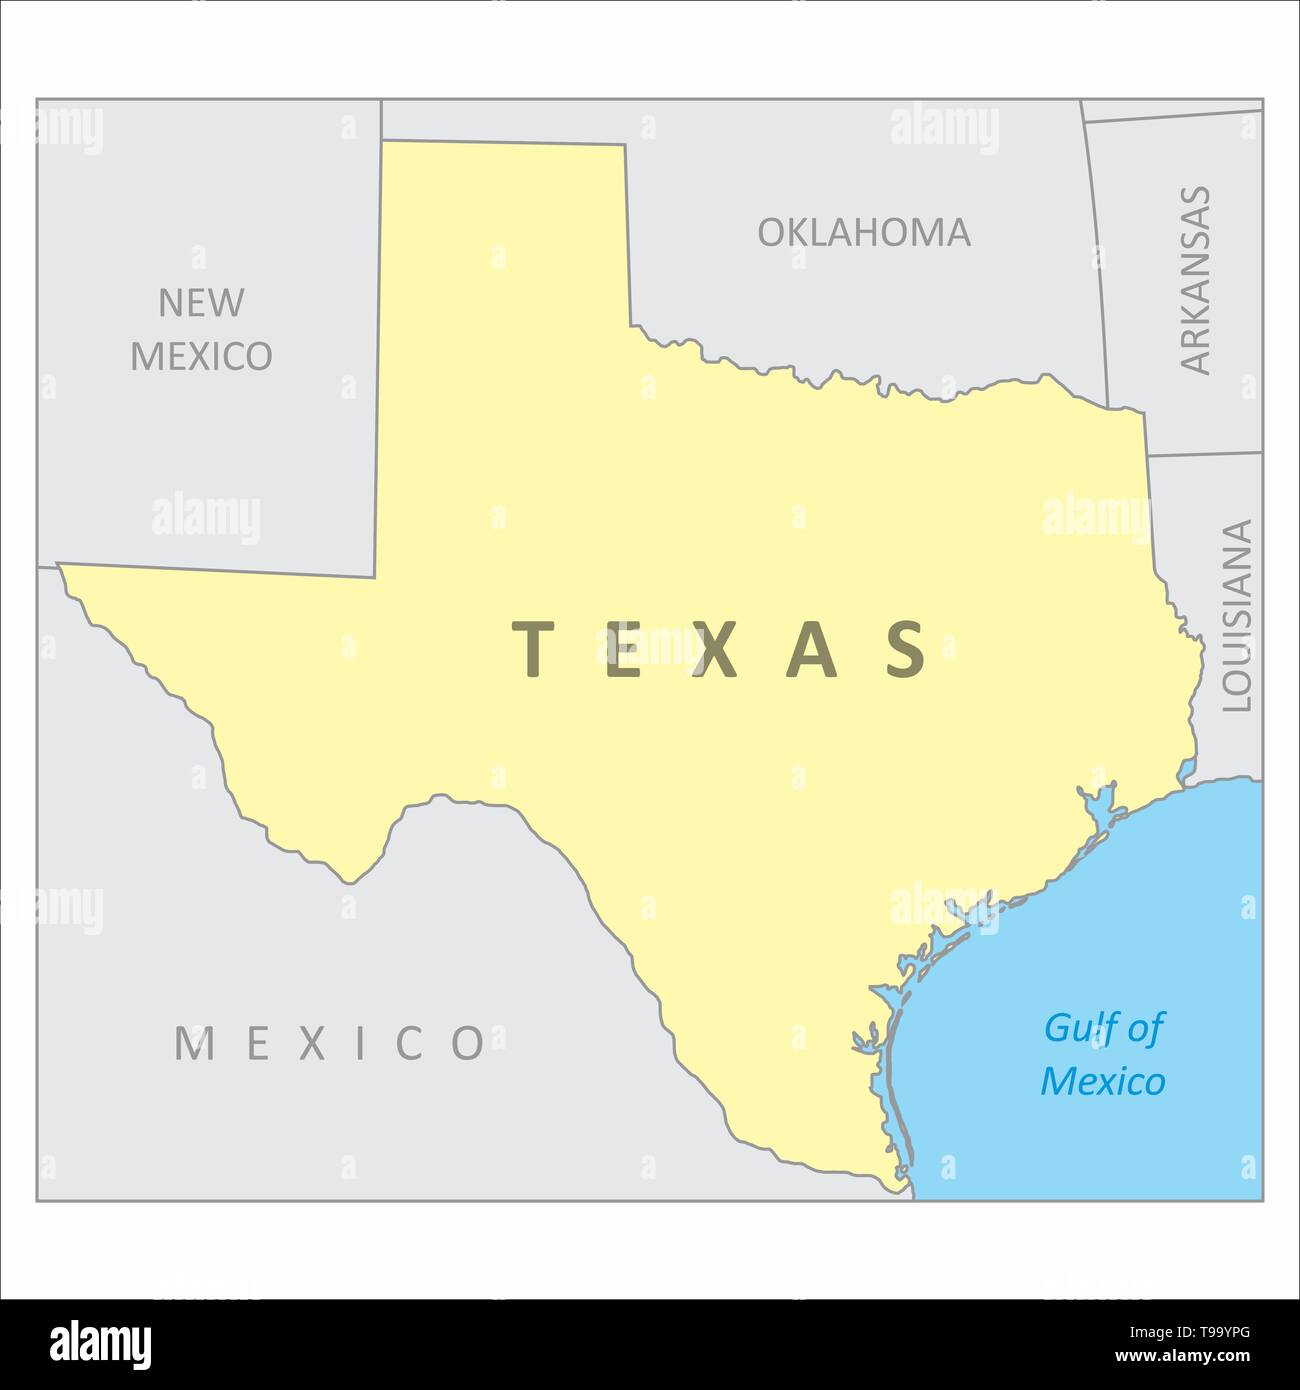 Colorful map of the Texas region in the USA Stock Vector